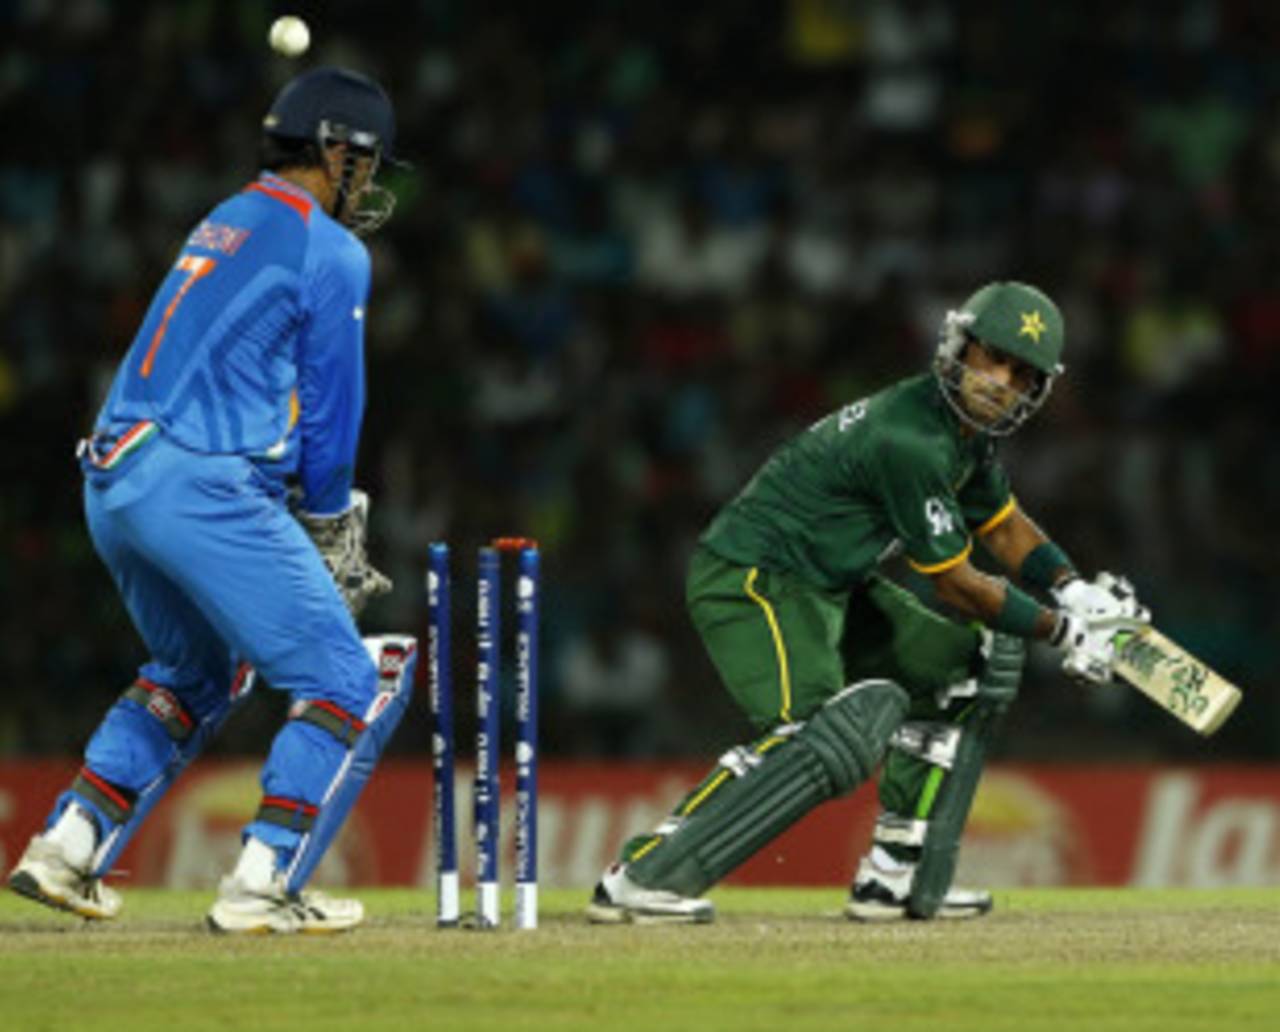 Mohammad Hafeez's hesitant, even clueless stay sucked all life out of what had been a stirring start&nbsp;&nbsp;&bull;&nbsp;&nbsp;Associated Press